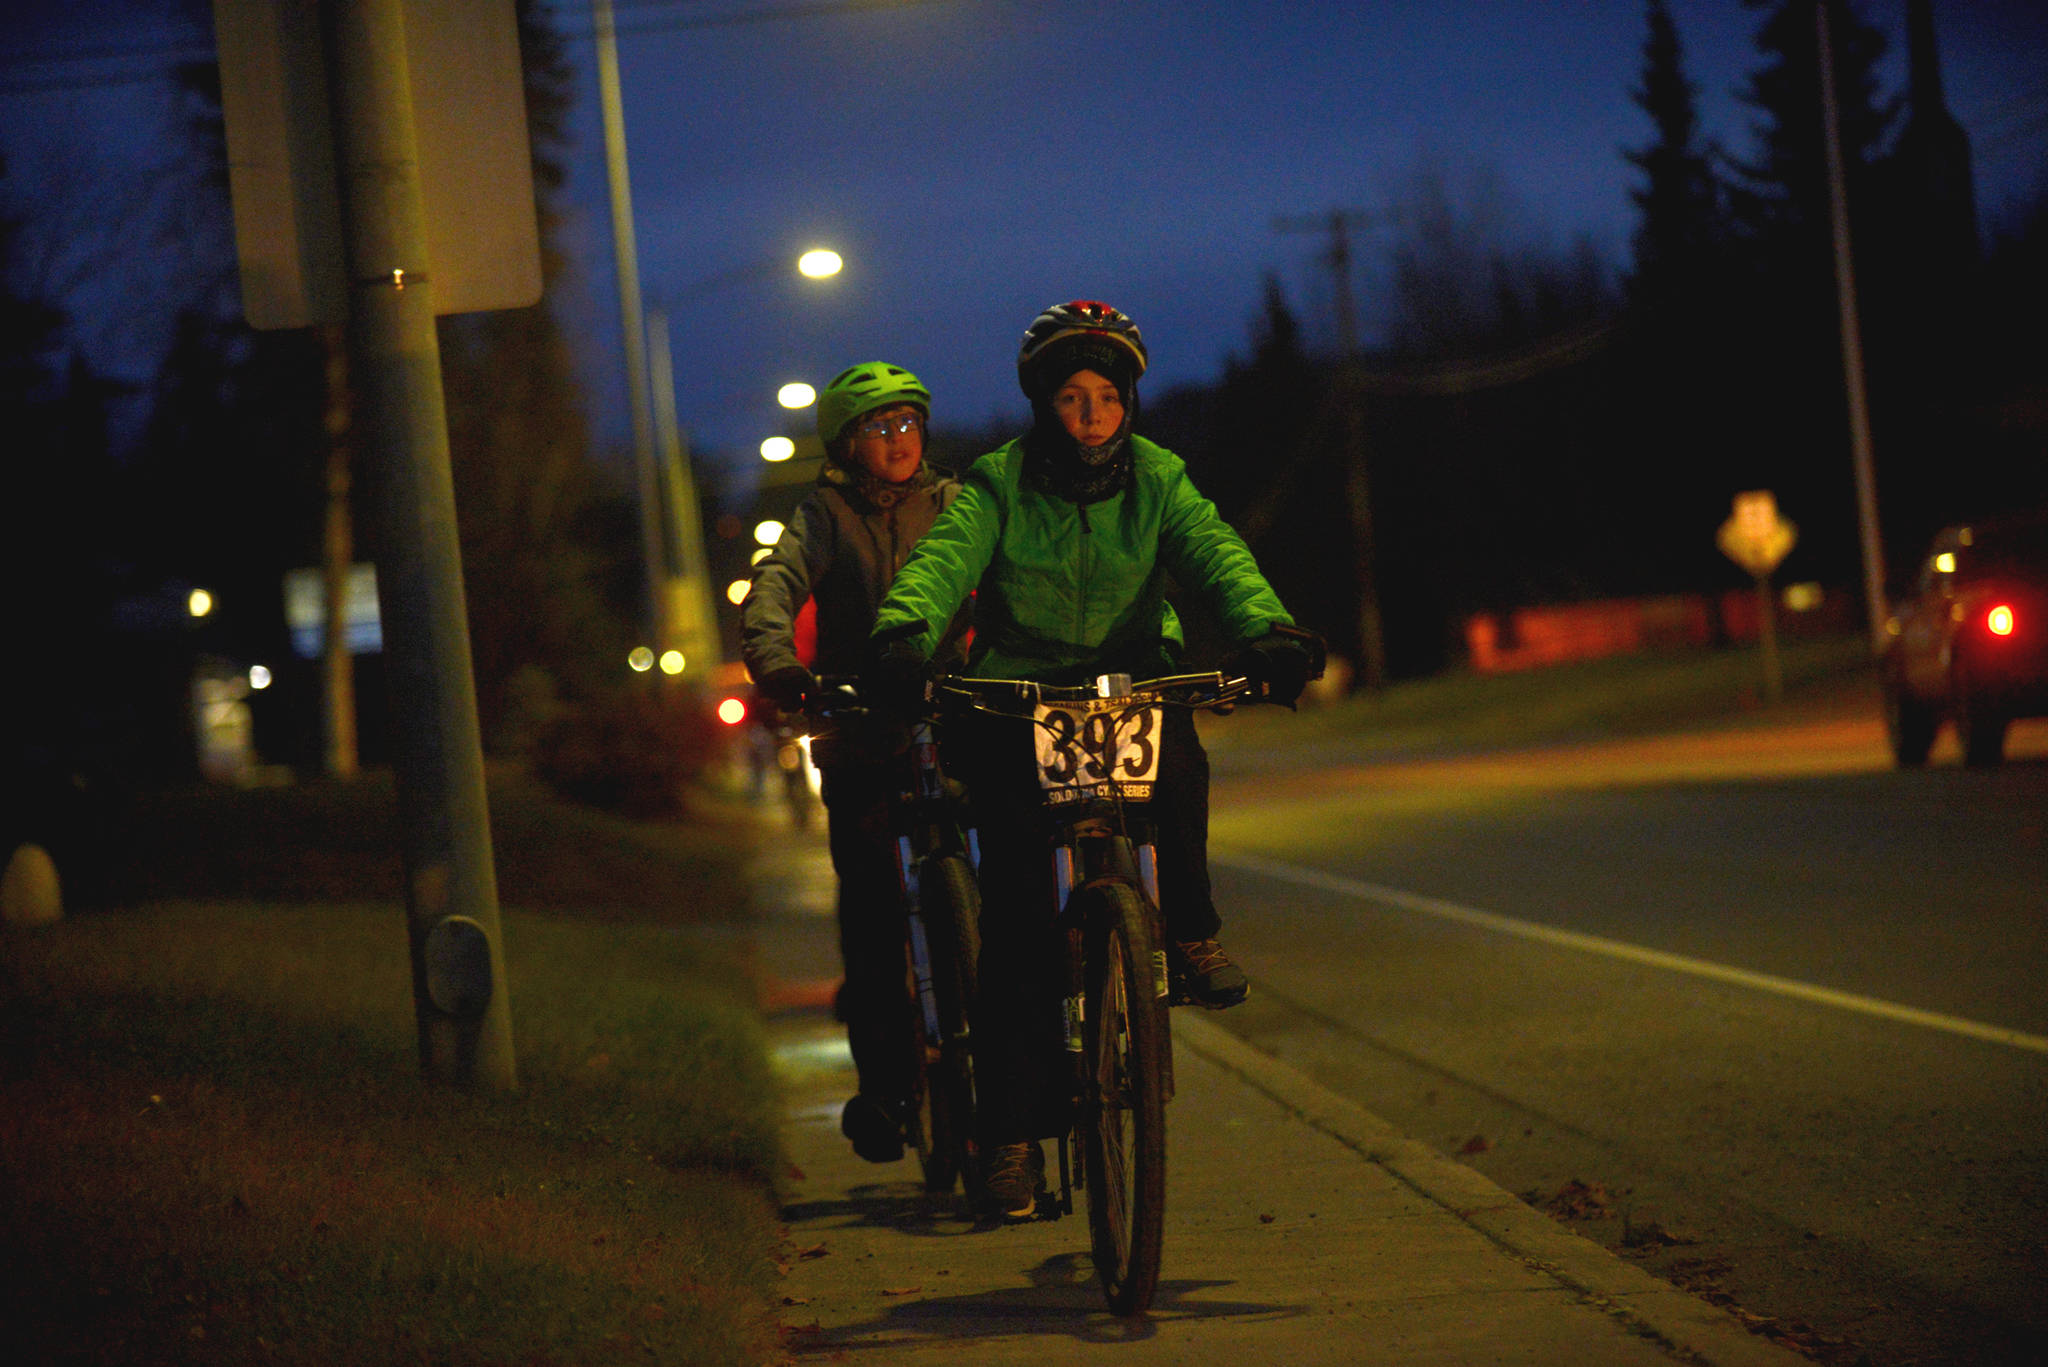 Above: :Bicyclists rode through the streets of Soldotna on Saturday night for the first full moon bike ride, a social event that brings participants on a slow, but steady, bike ride throughout the city’s streets to coincide with the full moon.  Top: Bicyclists of all ages joined in on the first full moon bike ride, a social ride through the streets of Soldotna on Saturday night. (Photos by Ben Boettger/Peninsula Clarion)